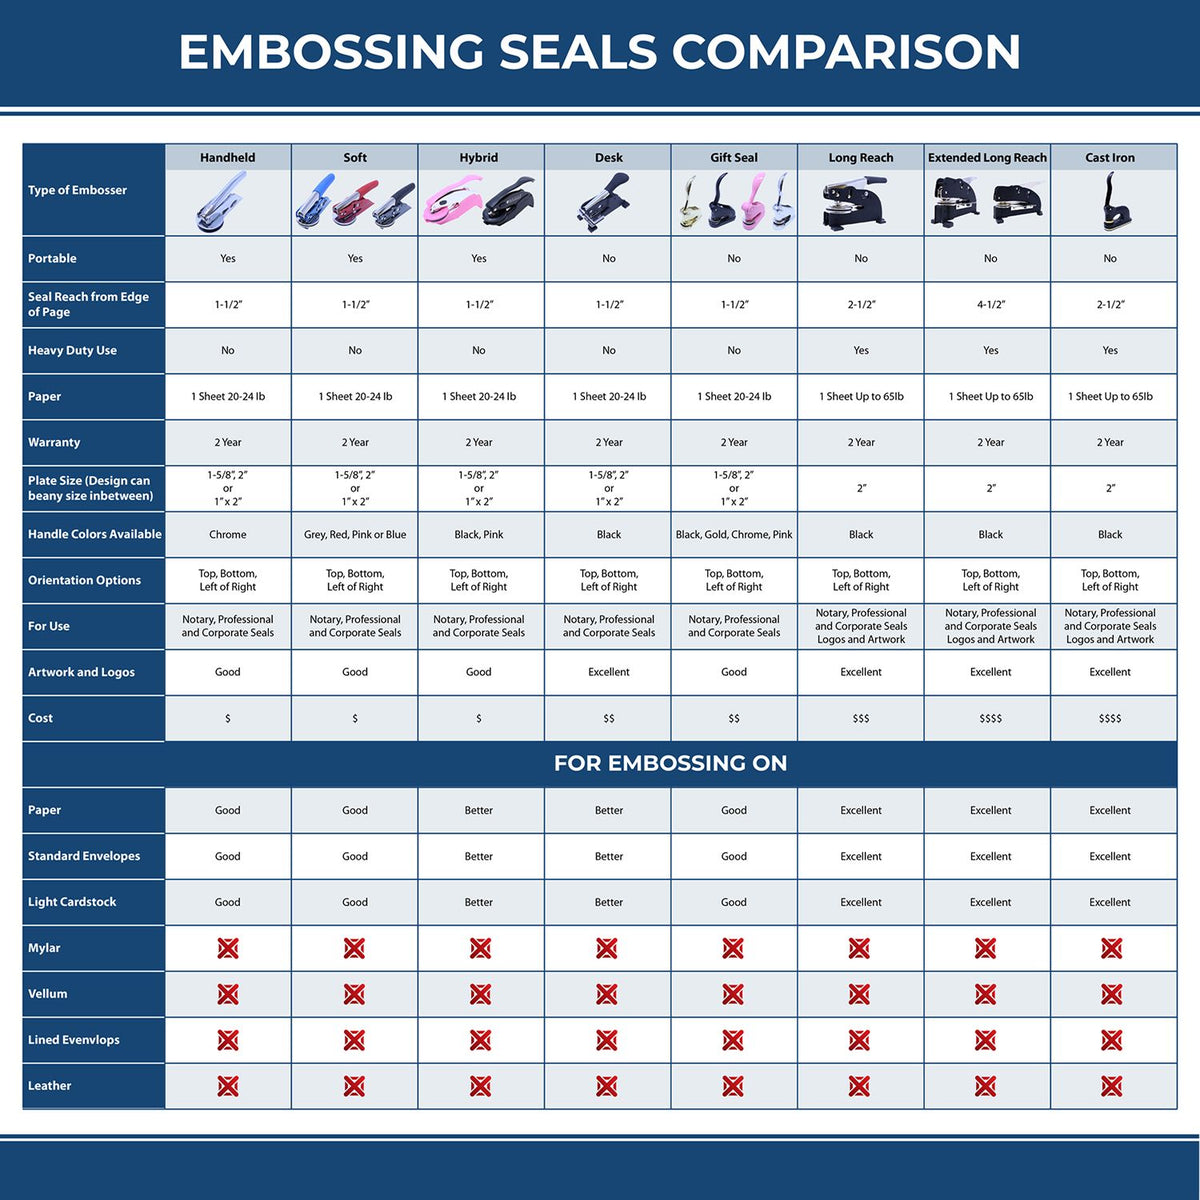 A comparison chart for the different types of mount models available for the Handheld Illinois Professional Geologist Embosser